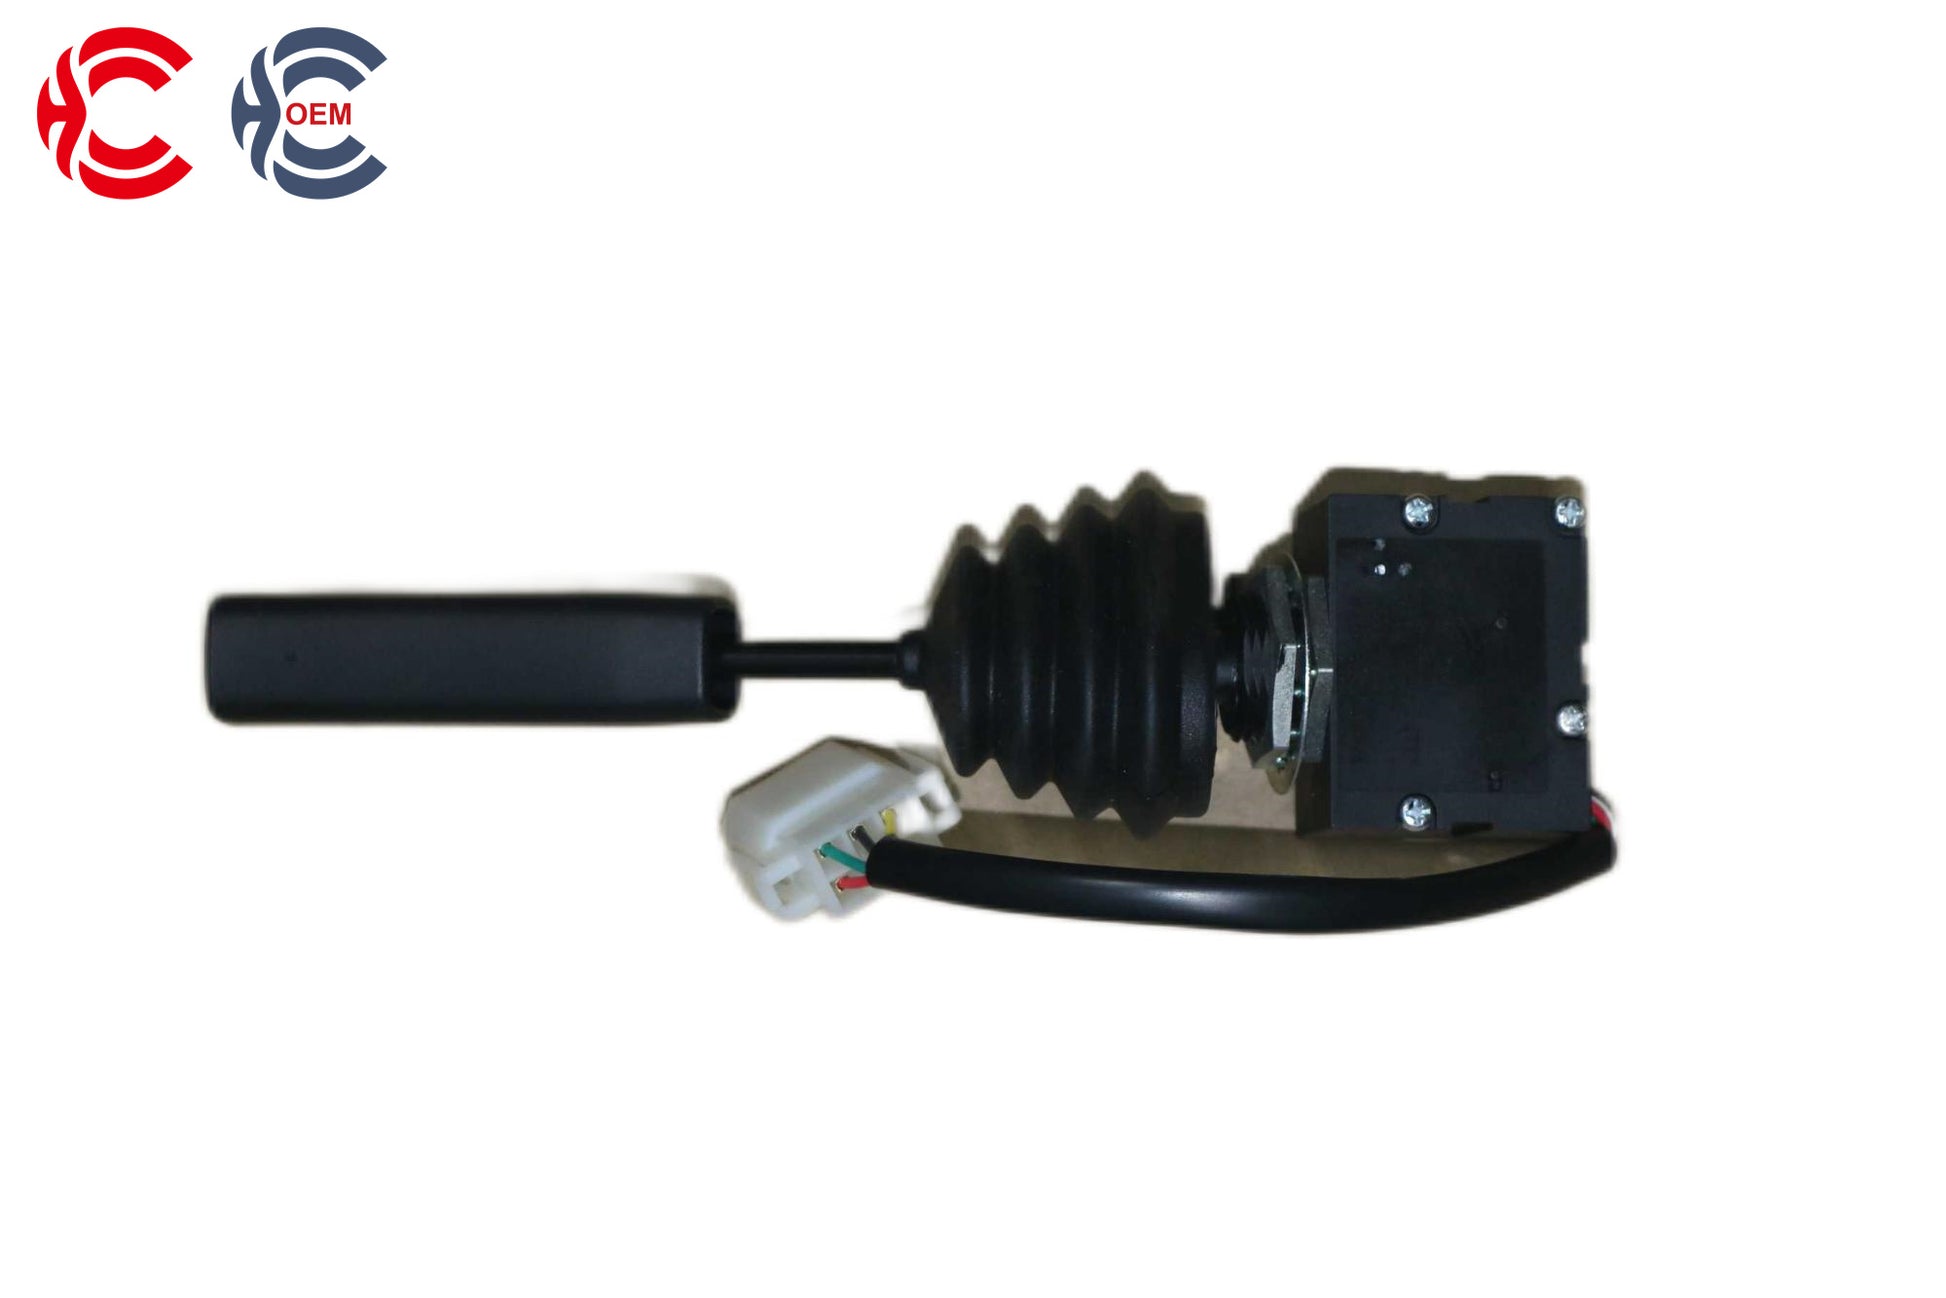 OEM: 3631-00039Material: ABS MetalColor: Black SilverOrigin: Made in ChinaWeight: 200gPacking List: 1* Retarder Handle Switch More ServiceWe can provide OEM Manufacturing serviceWe can Be your one-step solution for Auto PartsWe can provide technical scheme for you Feel Free to Contact Us, We will get back to you as soon as possible.